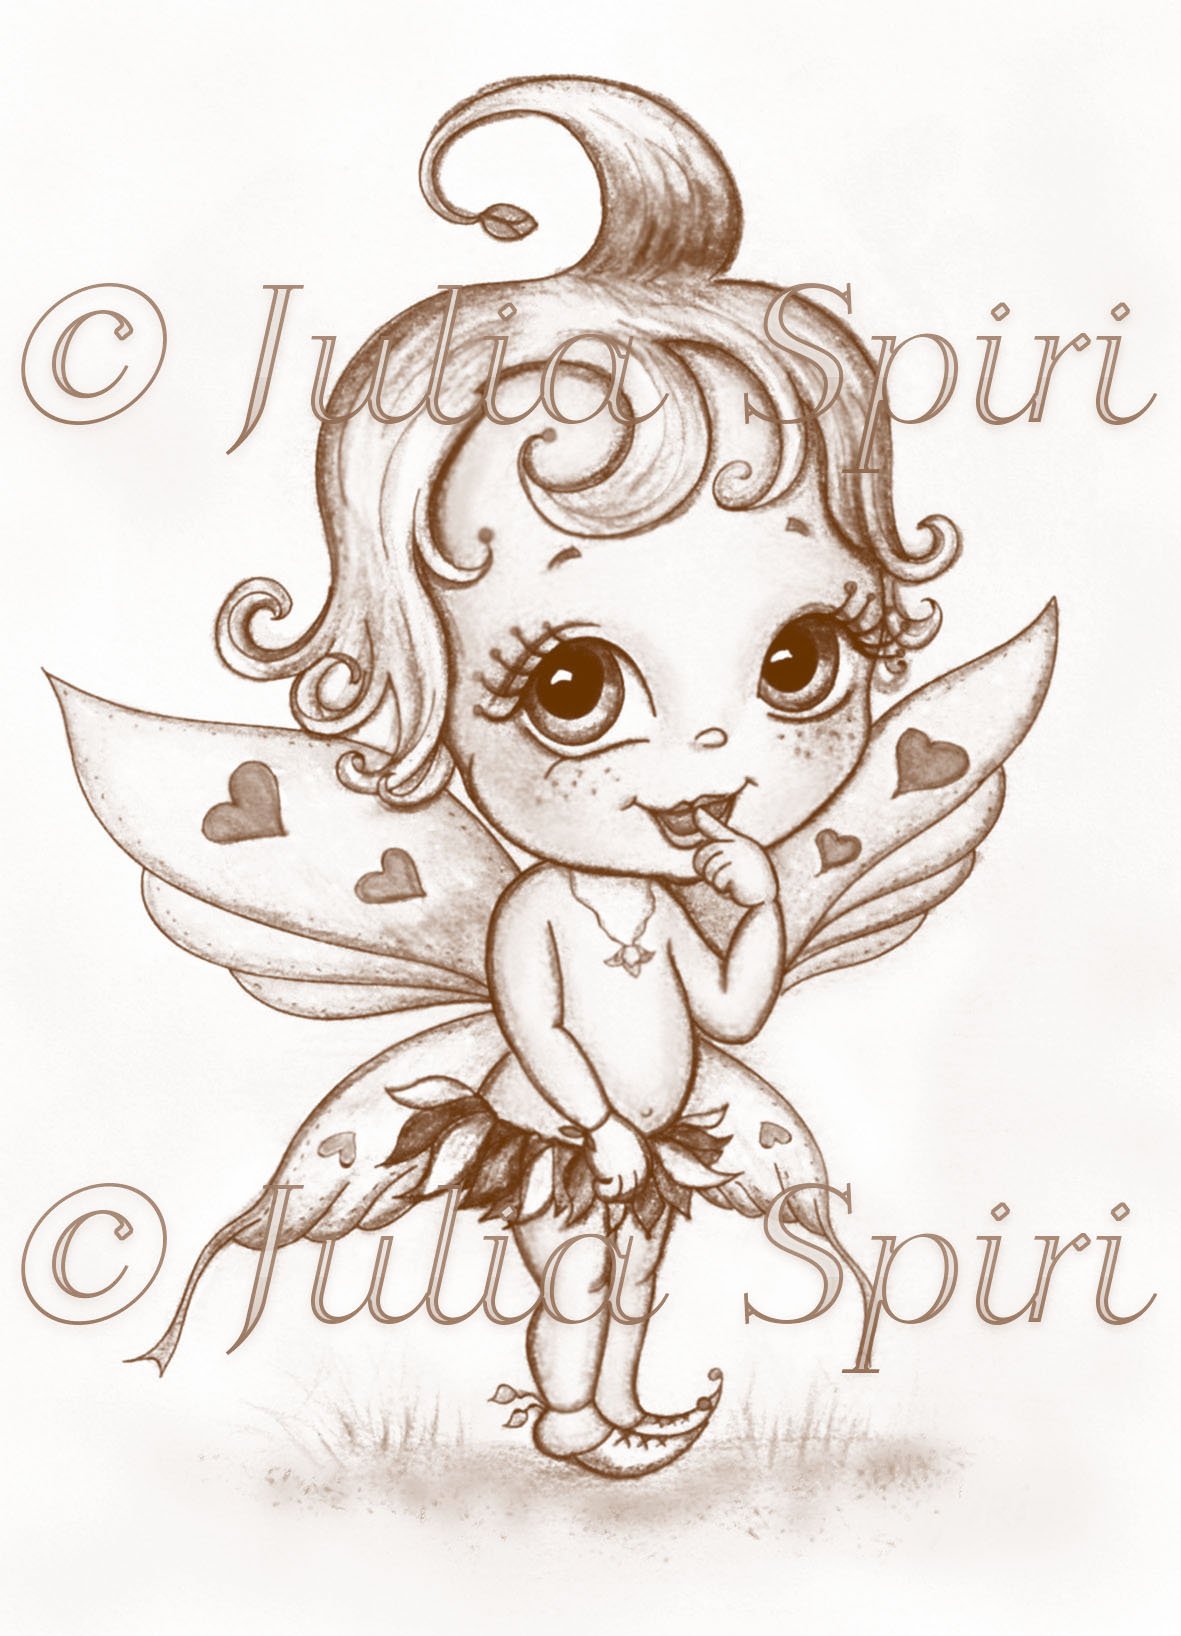 Coloring page fantasy child the baby fairy â the art of julia spiri